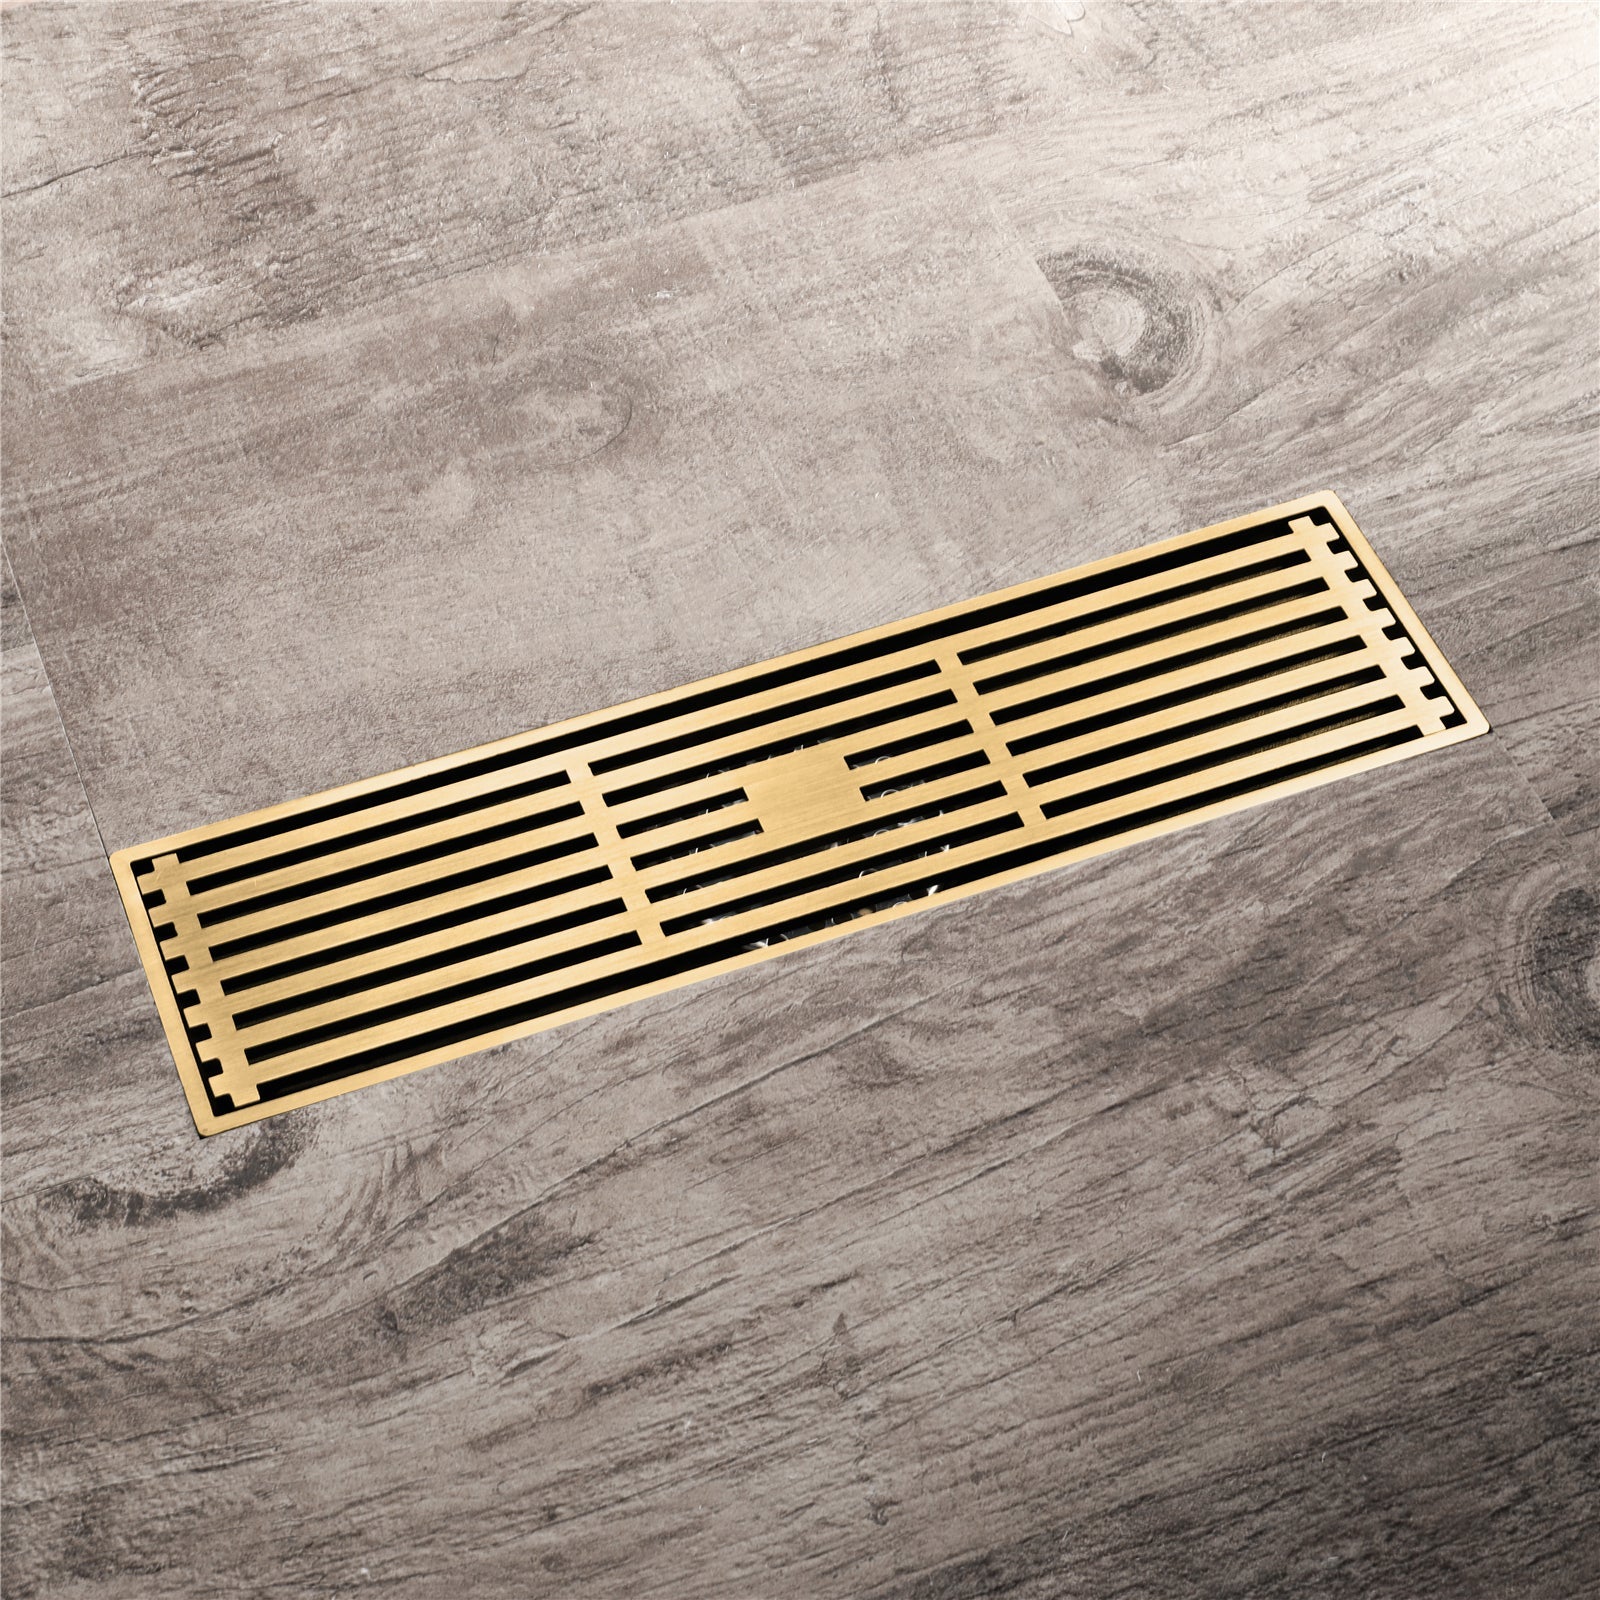 12-Inch Brushed Gold Rectangular Floor Drain - Square Hole Pattern Cover Grate - Removable - Includes Accessories